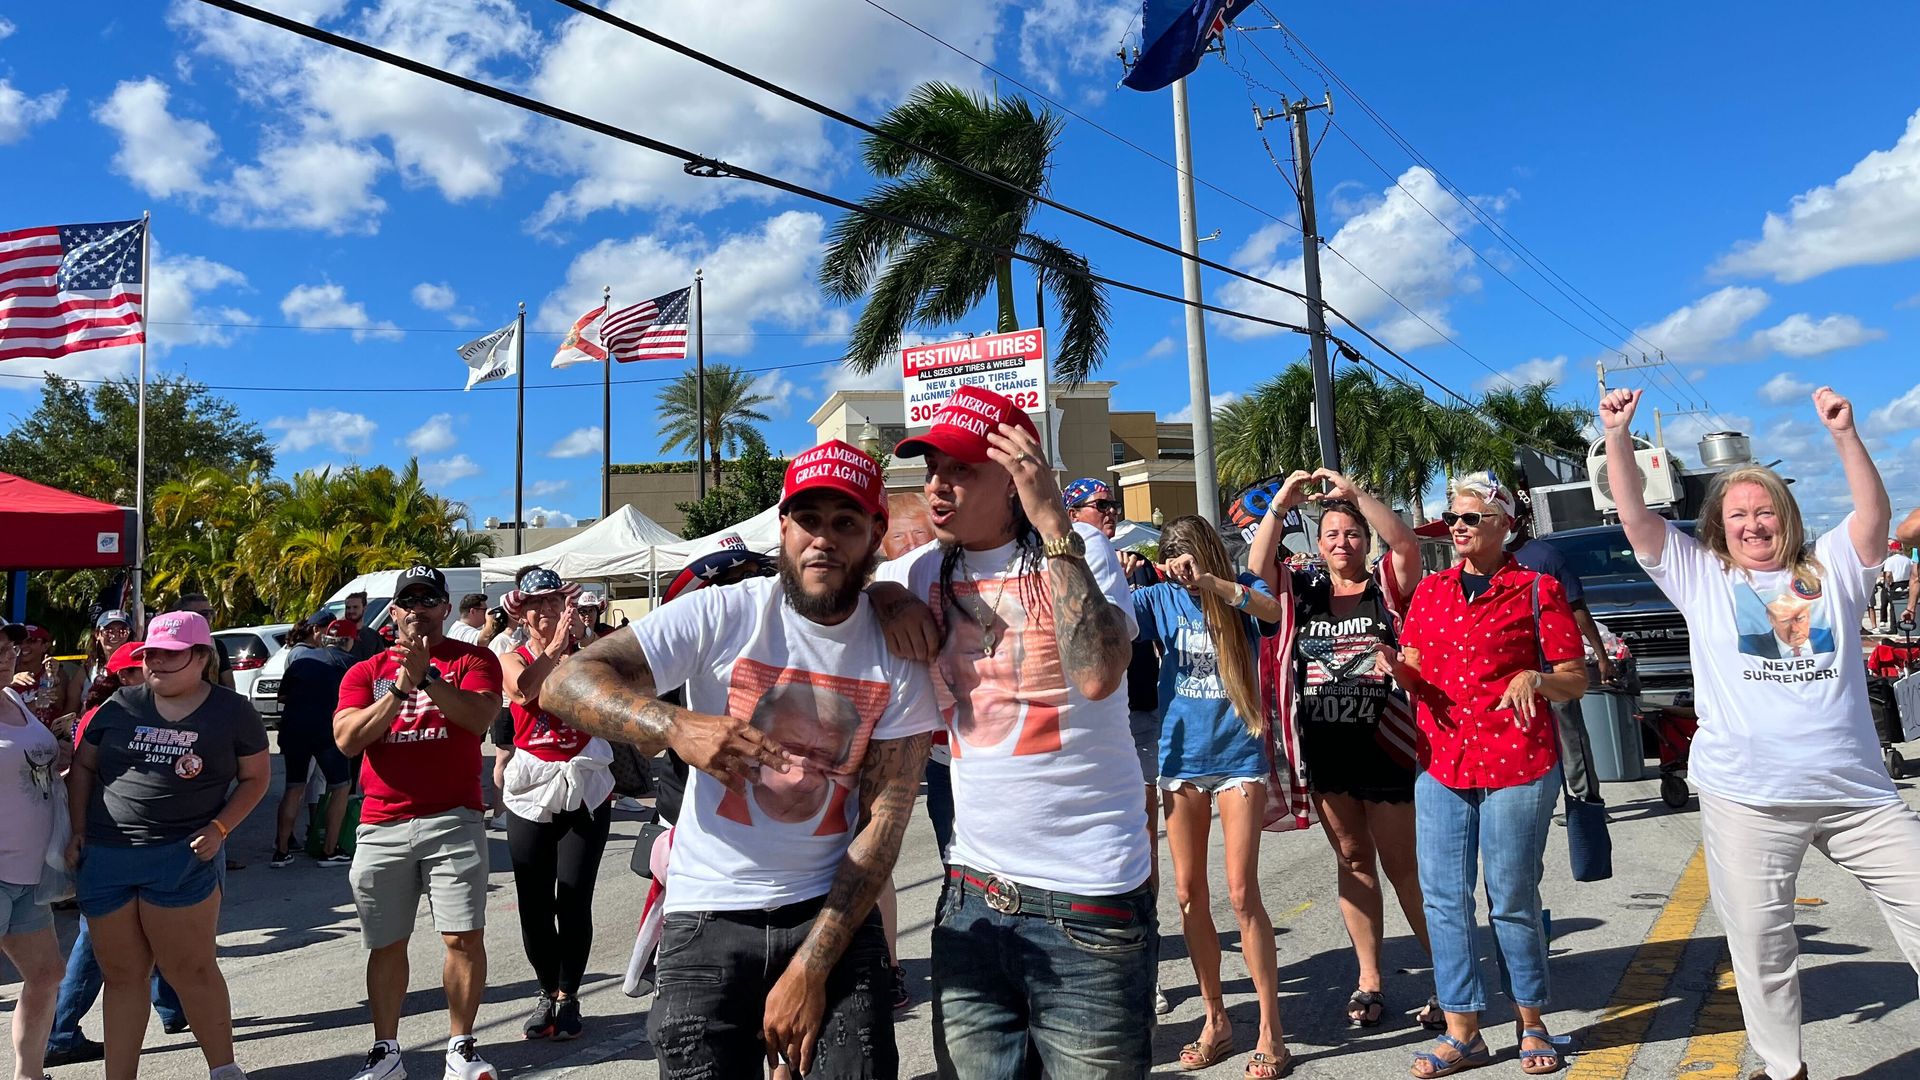 The Florida musical group Trump Latinos films a music video outside the rally as supporters dance behind them.